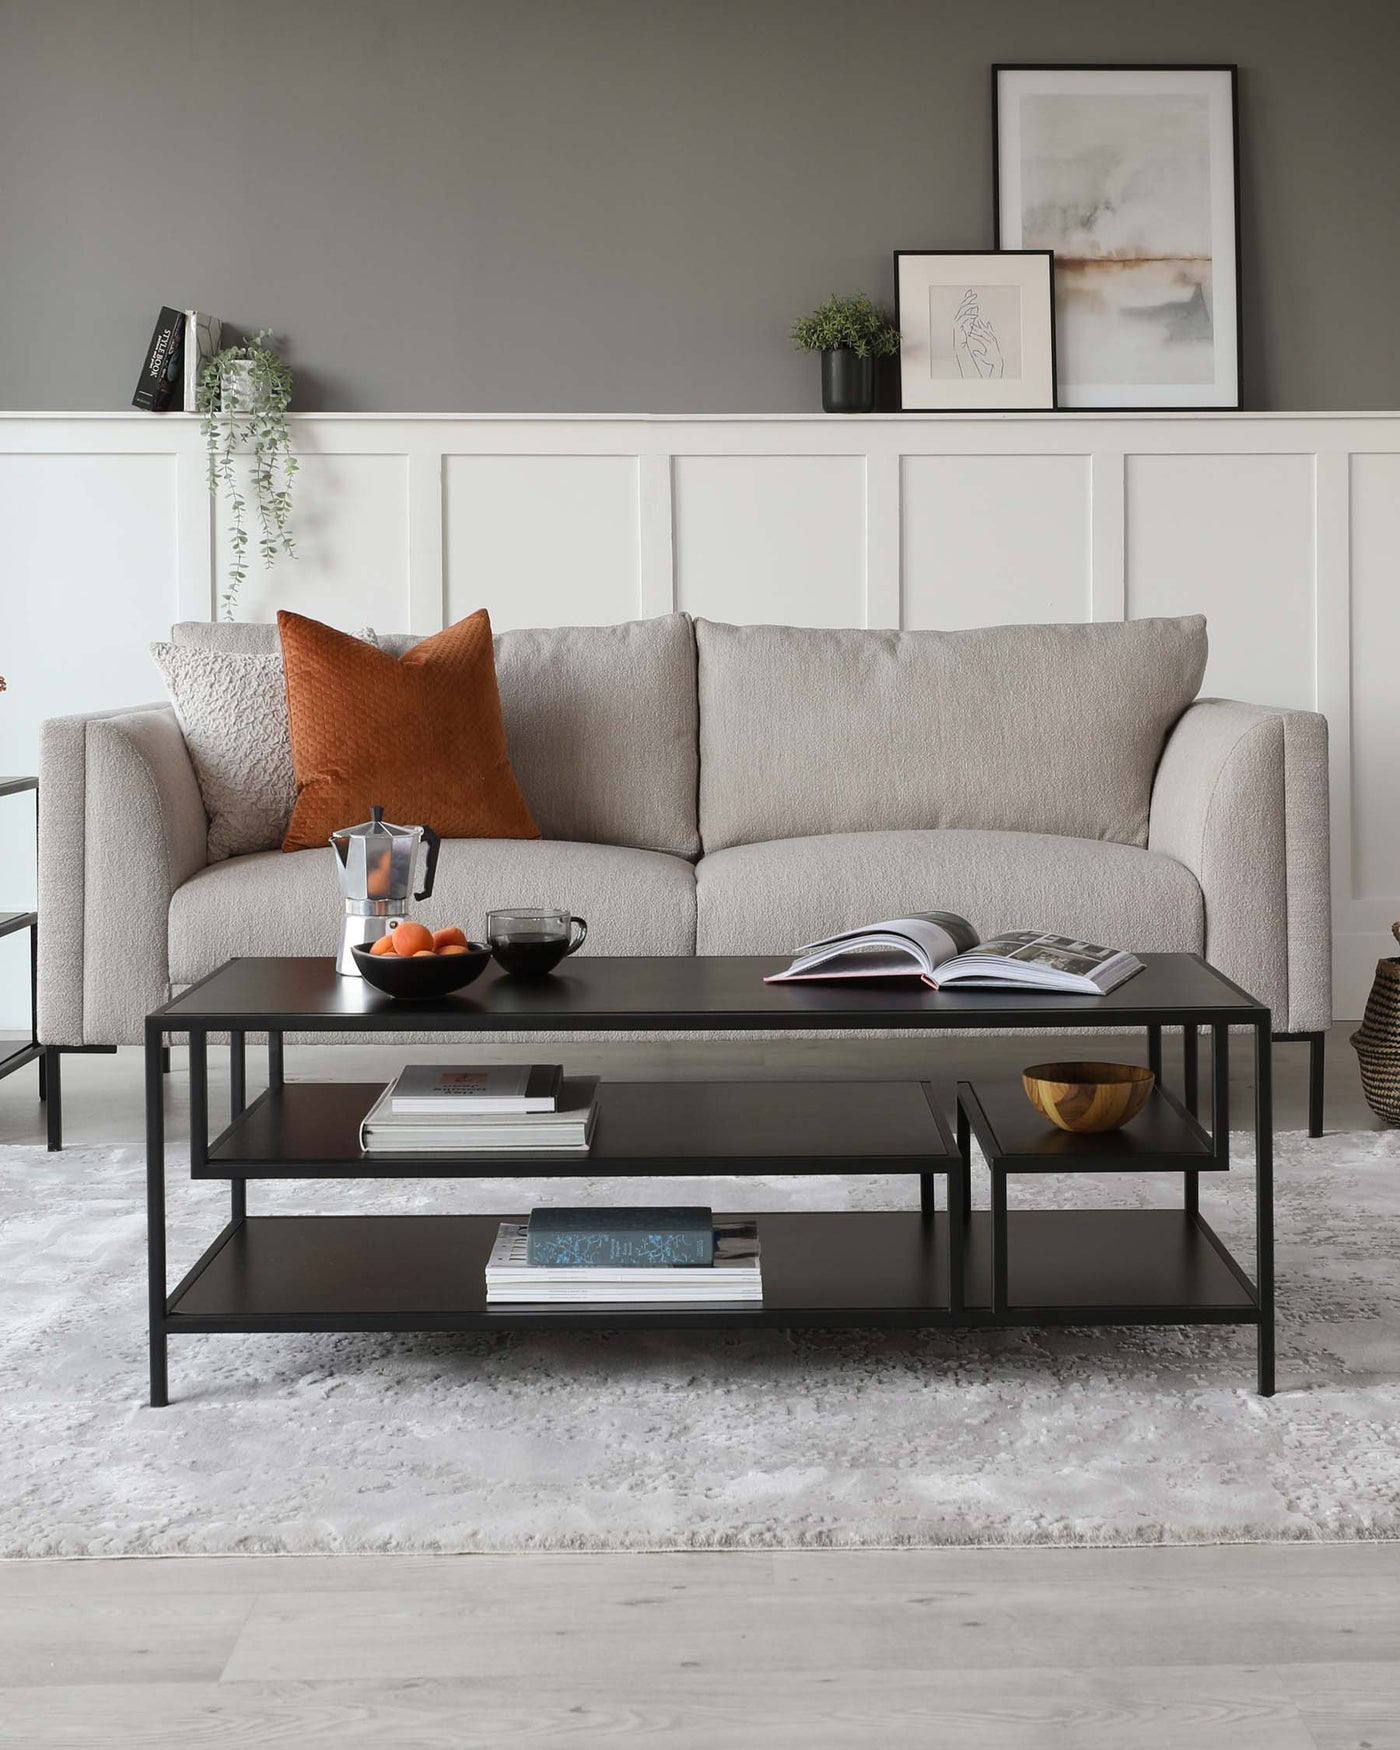 A contemporary living room featuring a neutral-toned upholstered three-seater sofa with textured throw pillows. A sleek, rectangular black metal coffee table with a glossy finish spans the front of the sofa, featuring an open shelf below for books and decorative accents. The room is completed with a shaggy white area rug beneath the furniture.